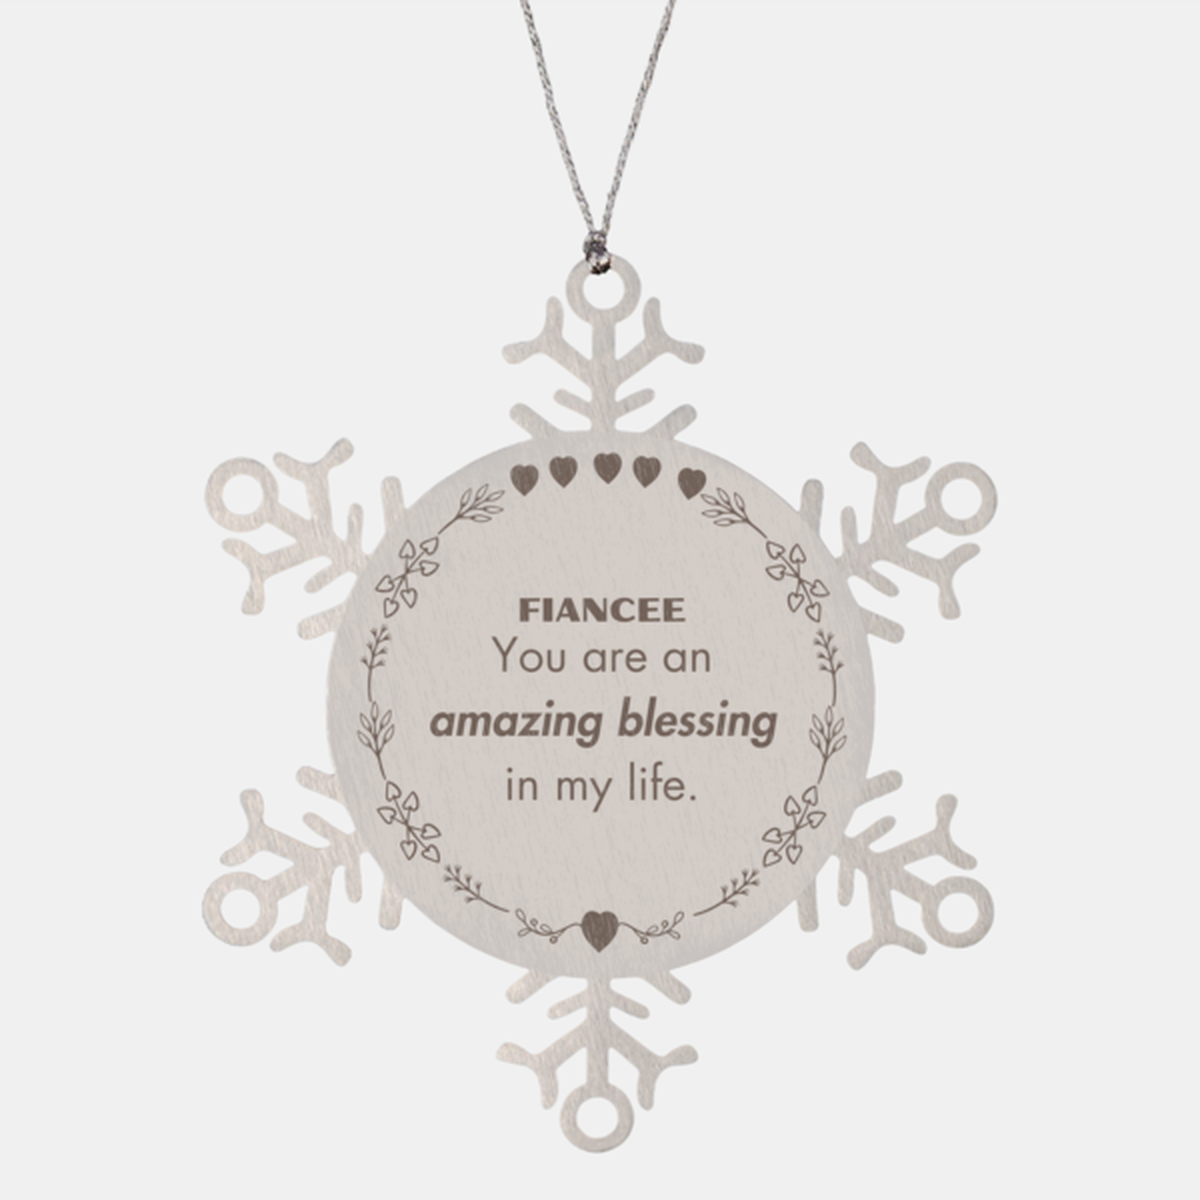 Fiancee Snowflake Ornament, You are an amazing blessing in my life, Thank You Gifts For Fiancee, Inspirational Birthday Christmas Unique Gifts For Fiancee